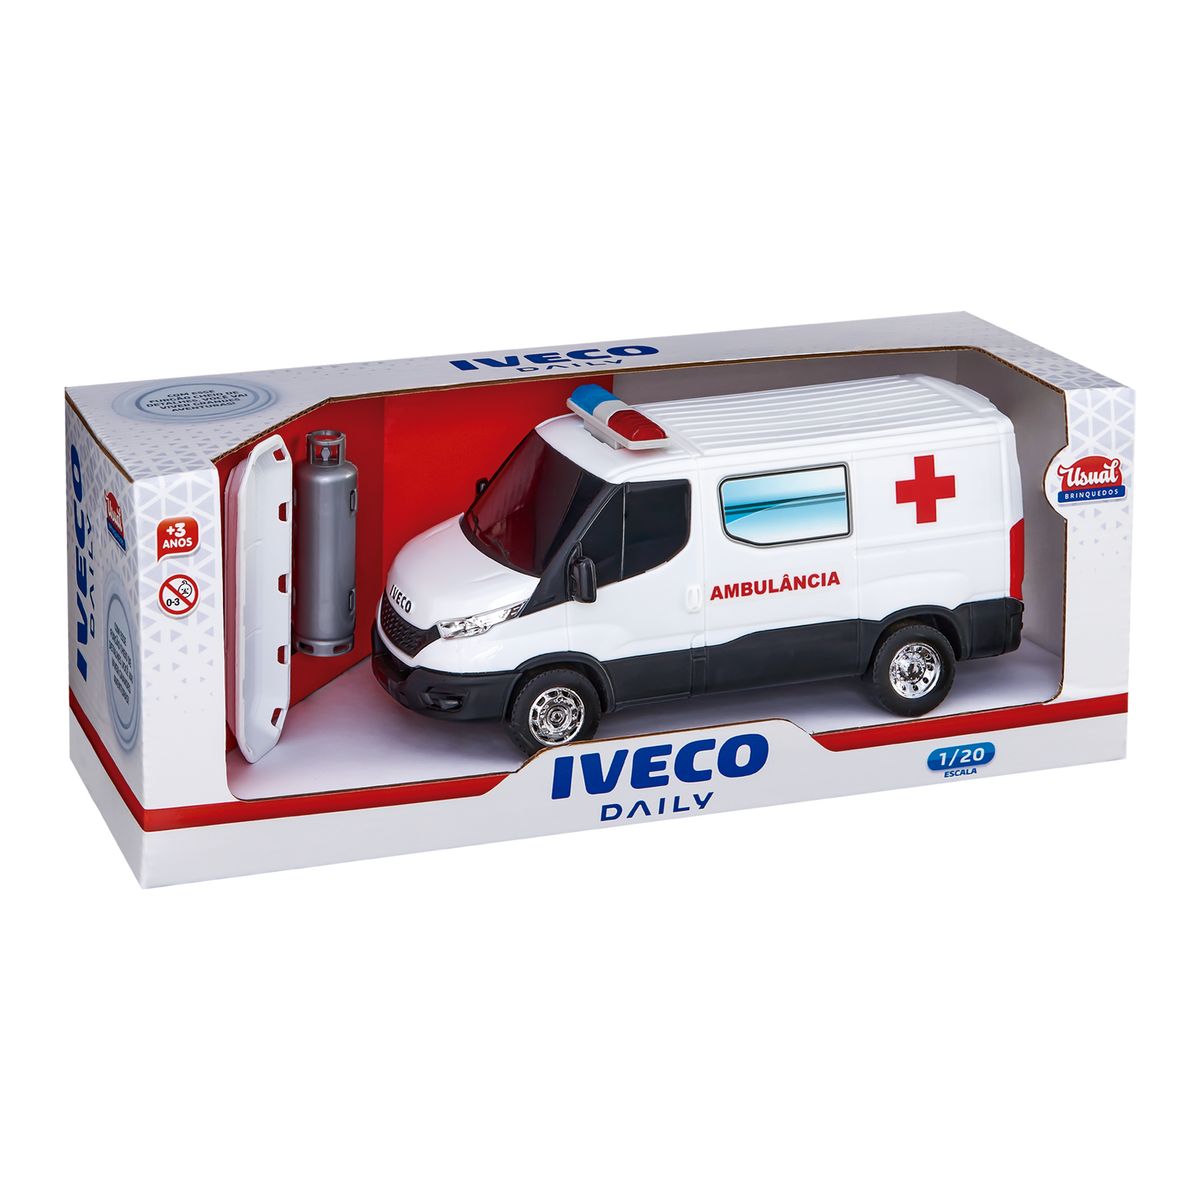 Ambulância Iveco Usual Daily